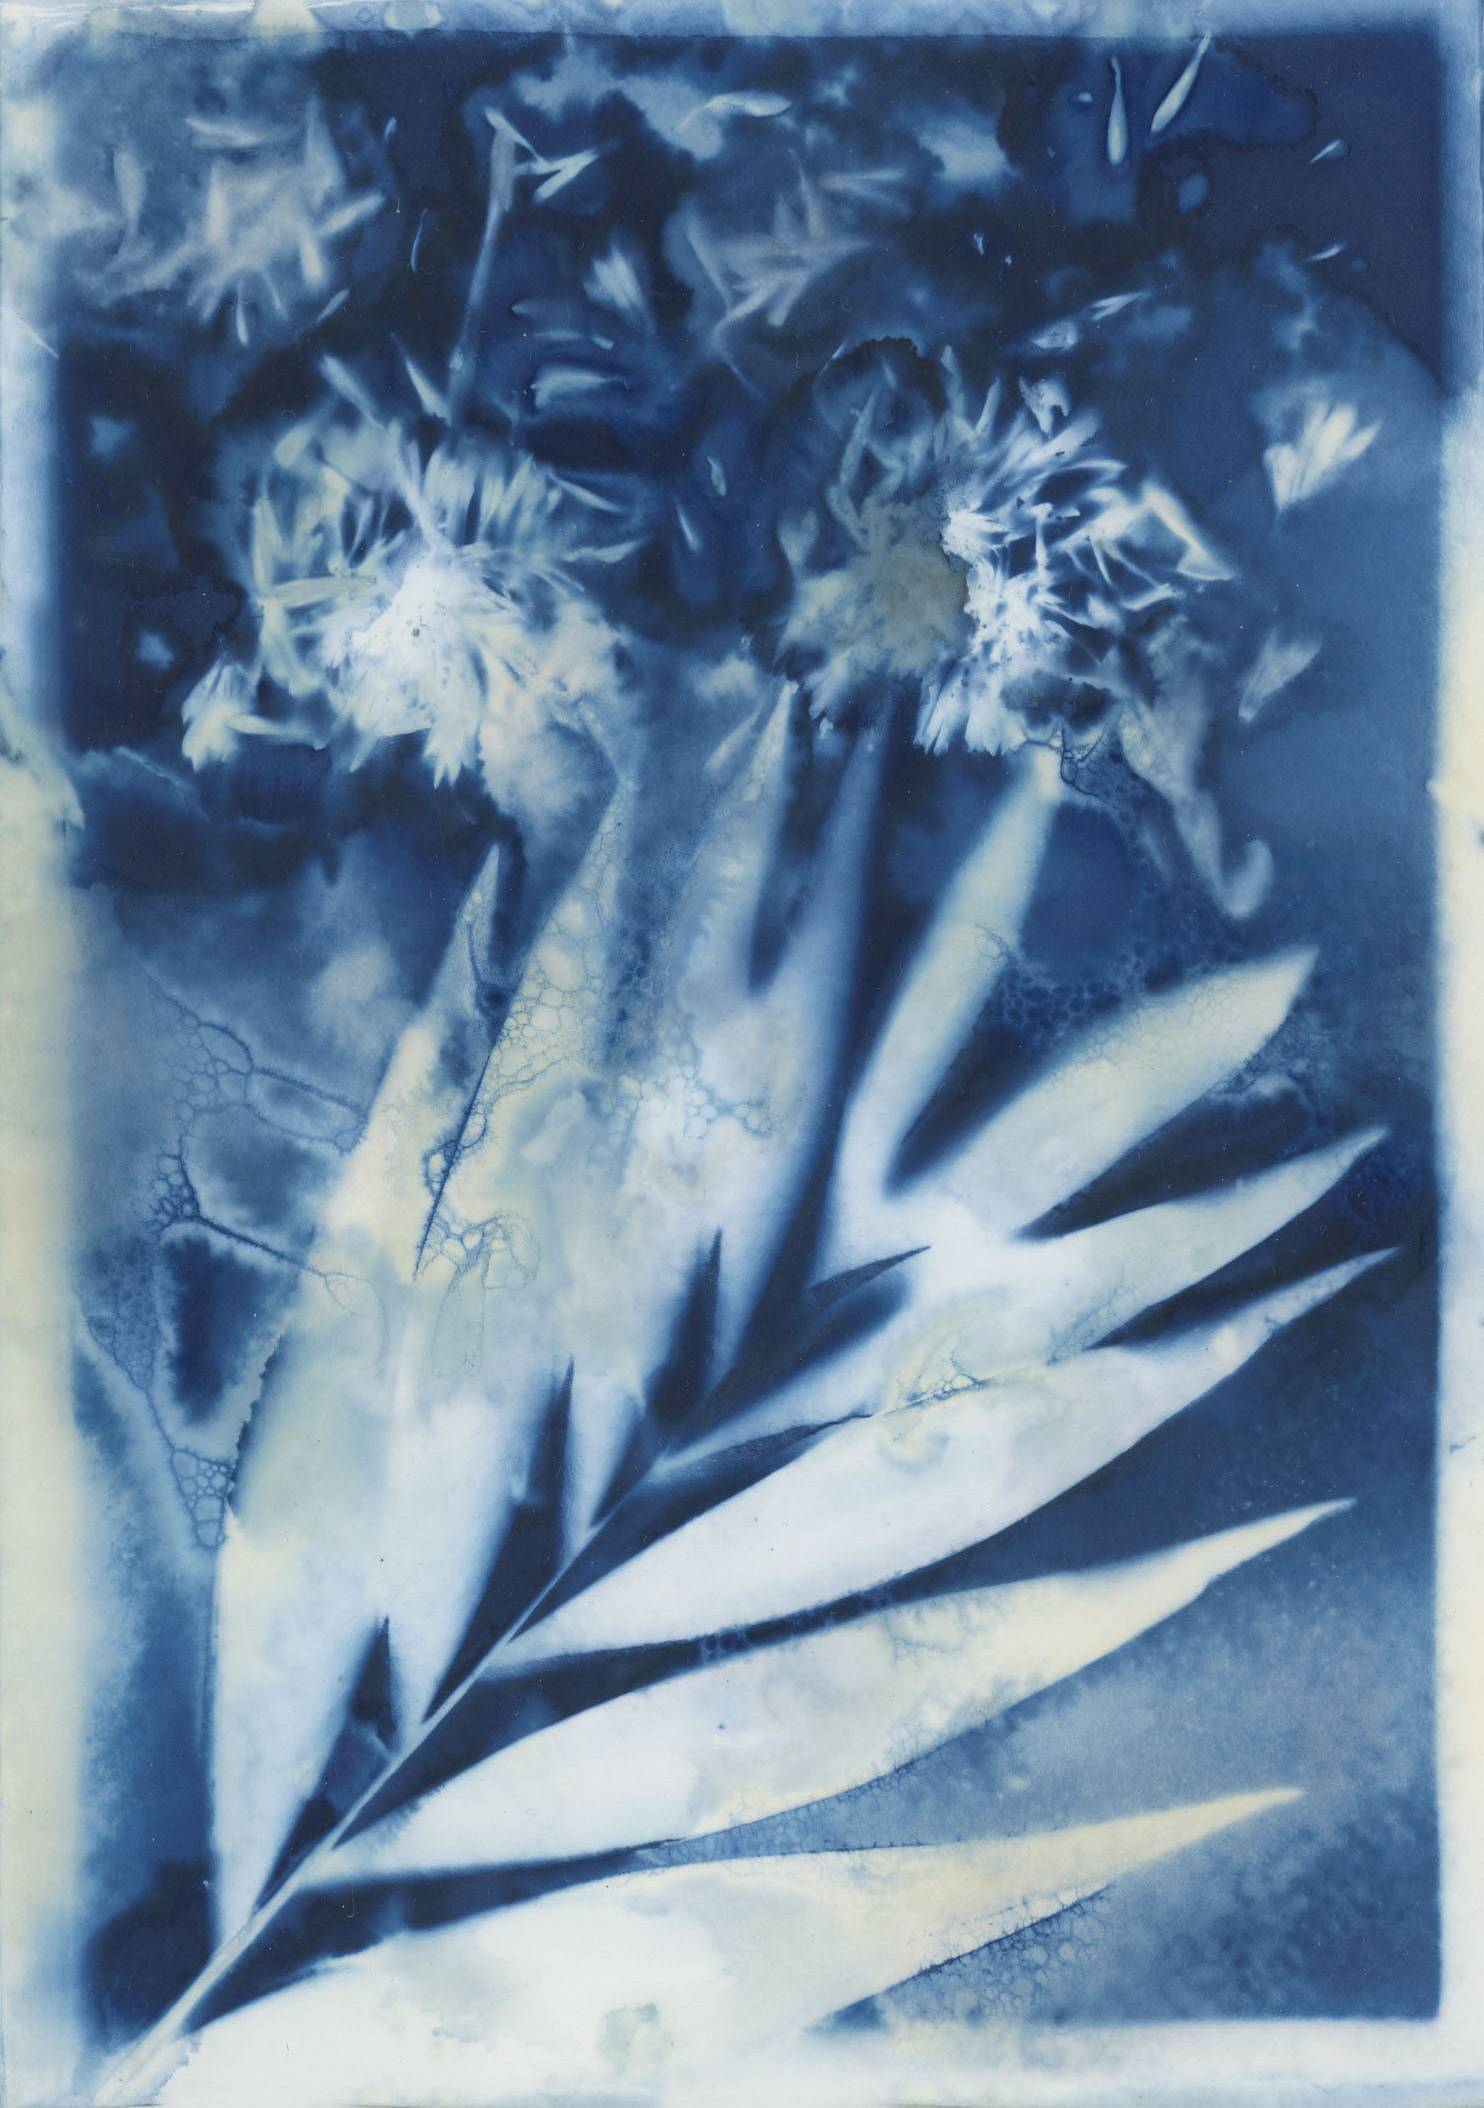 How to make Cyanotypes on Paper?